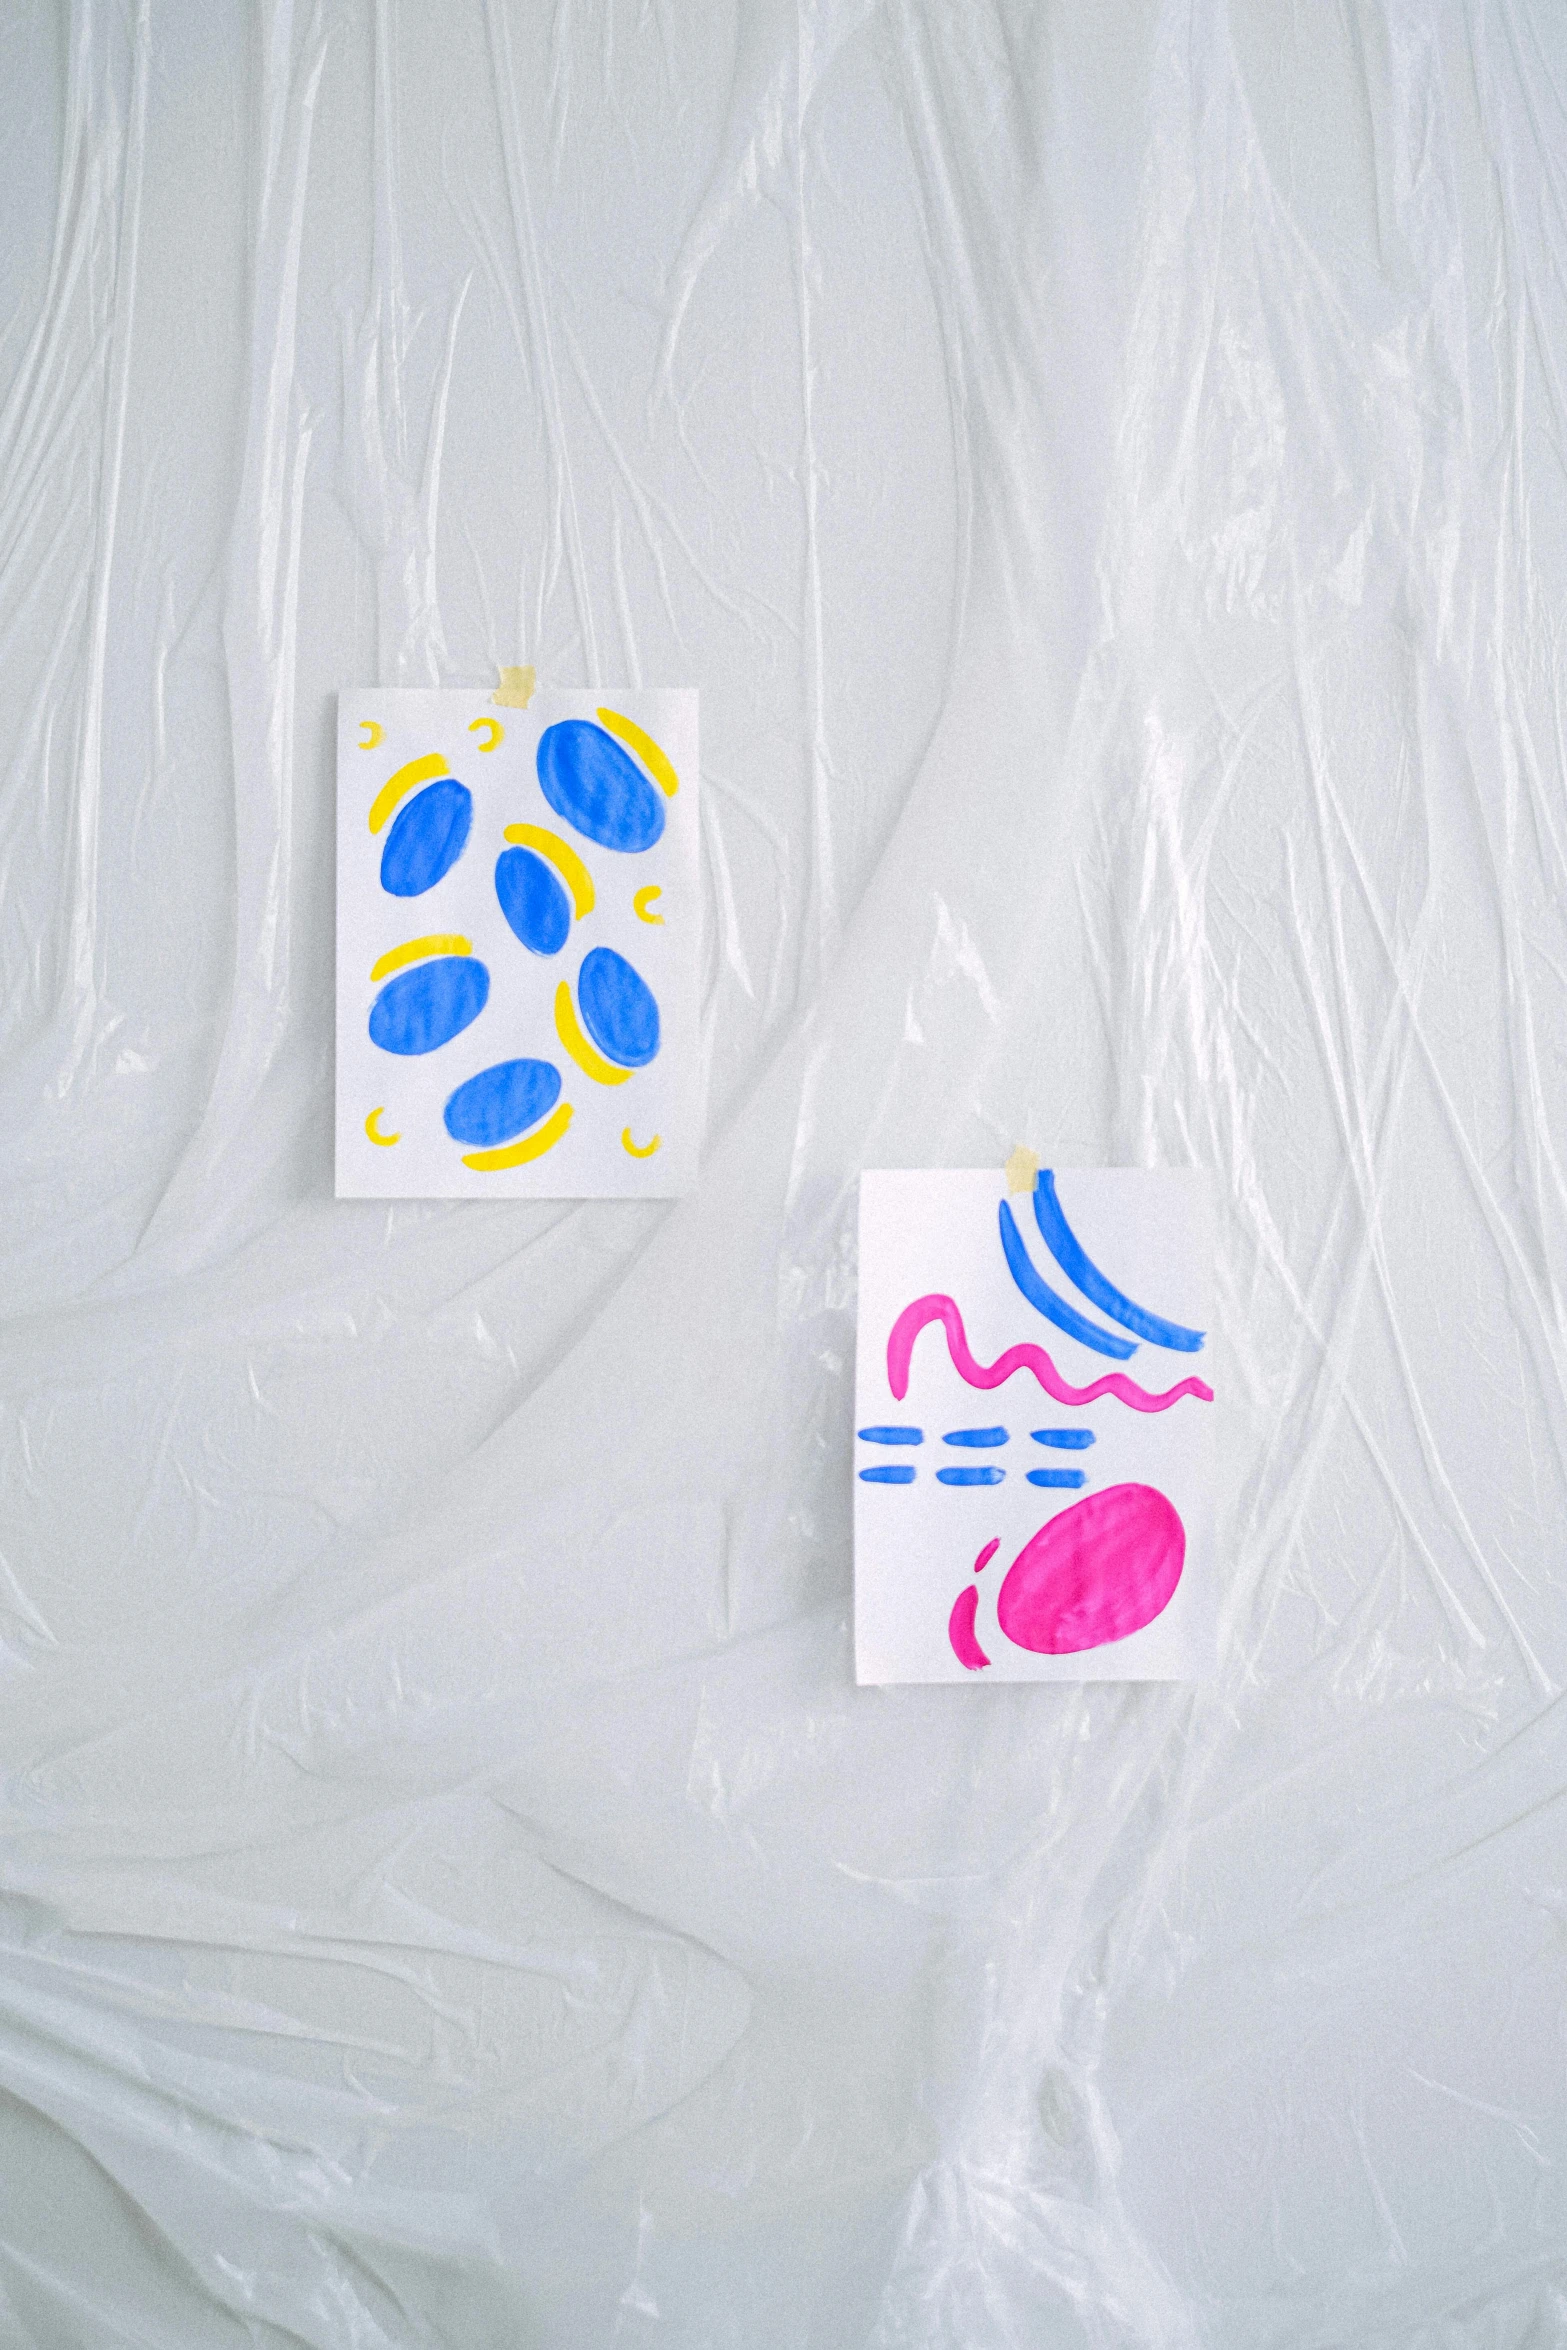 a couple of paintings sitting on top of a white sheet, a screenprint, by Harvey Quaytman, unsplash, translucent eggs, playful and cheerful, dressed in plastic bags, ilustration